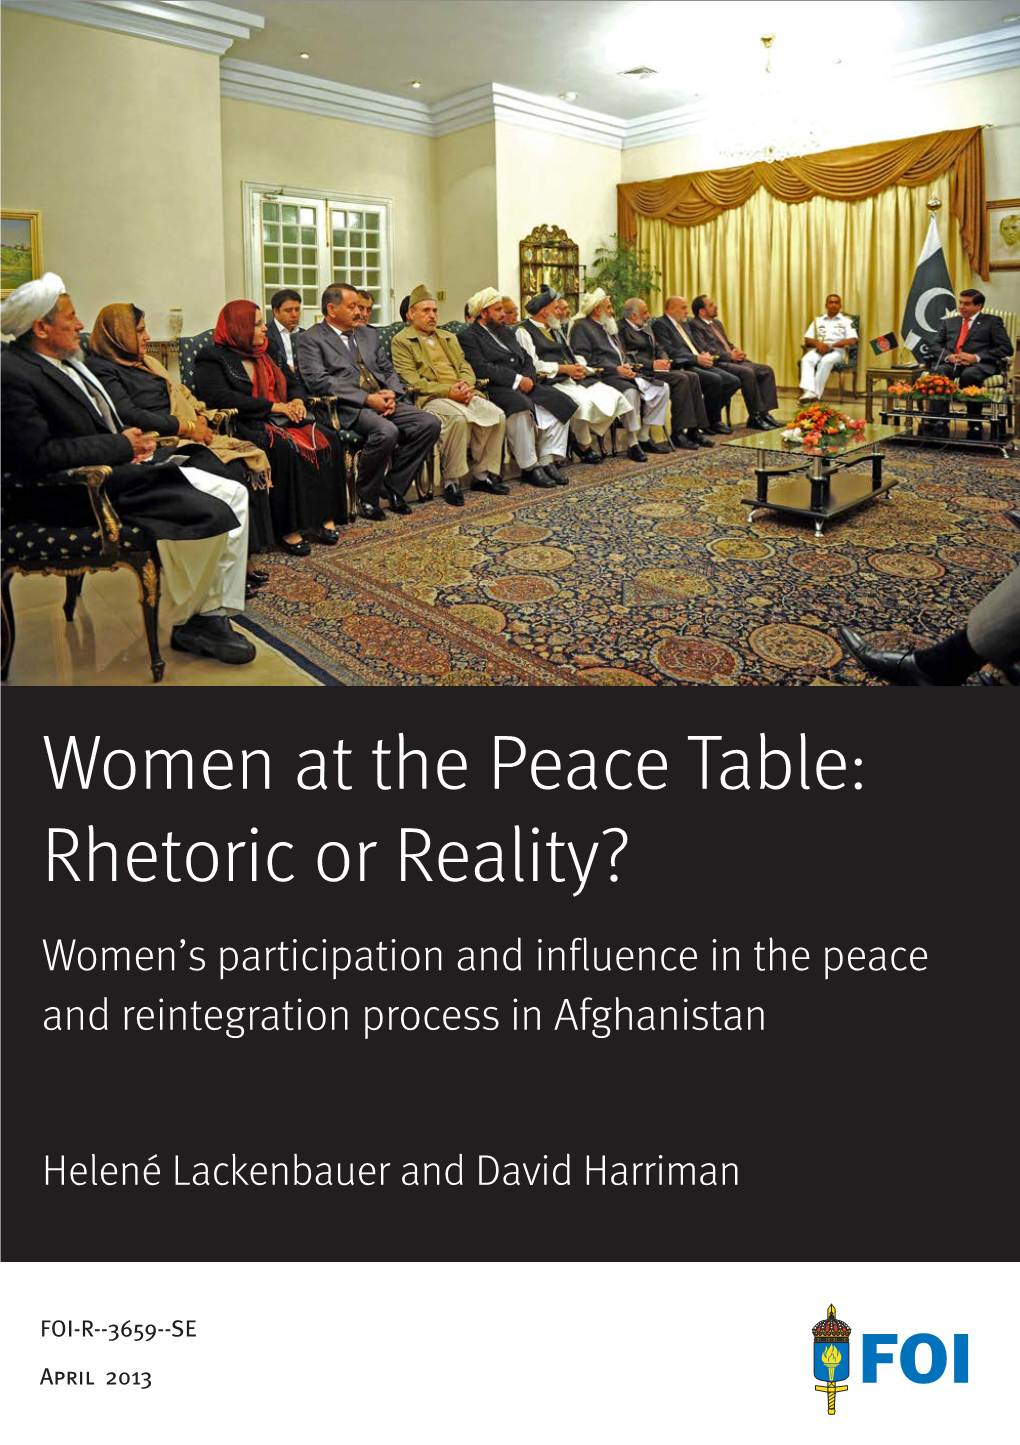 Women's Participation and Influence in the Peace and Reintegration Process in Afghanistan